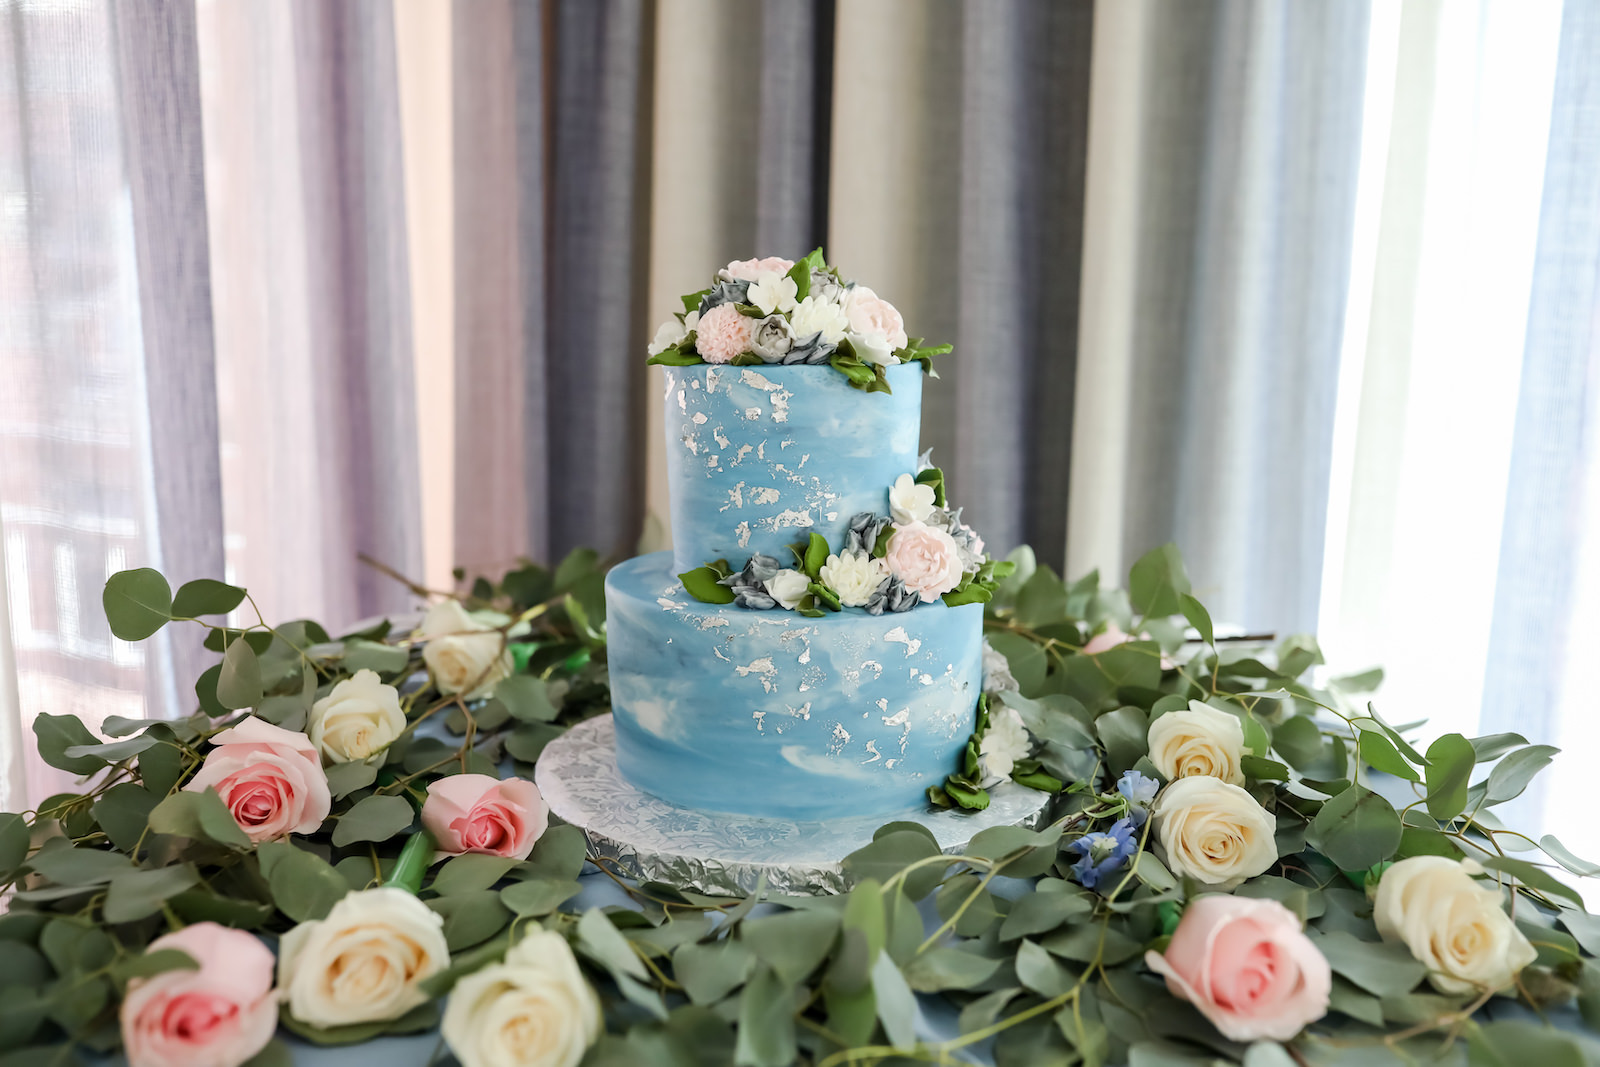 Two Tier Blue Marble Wedding Cake with Blush Pink and Grey and White Sugar Flowers | Wedding Cake Table with Eucalyptus Greenery and White and Blush Pink Roses